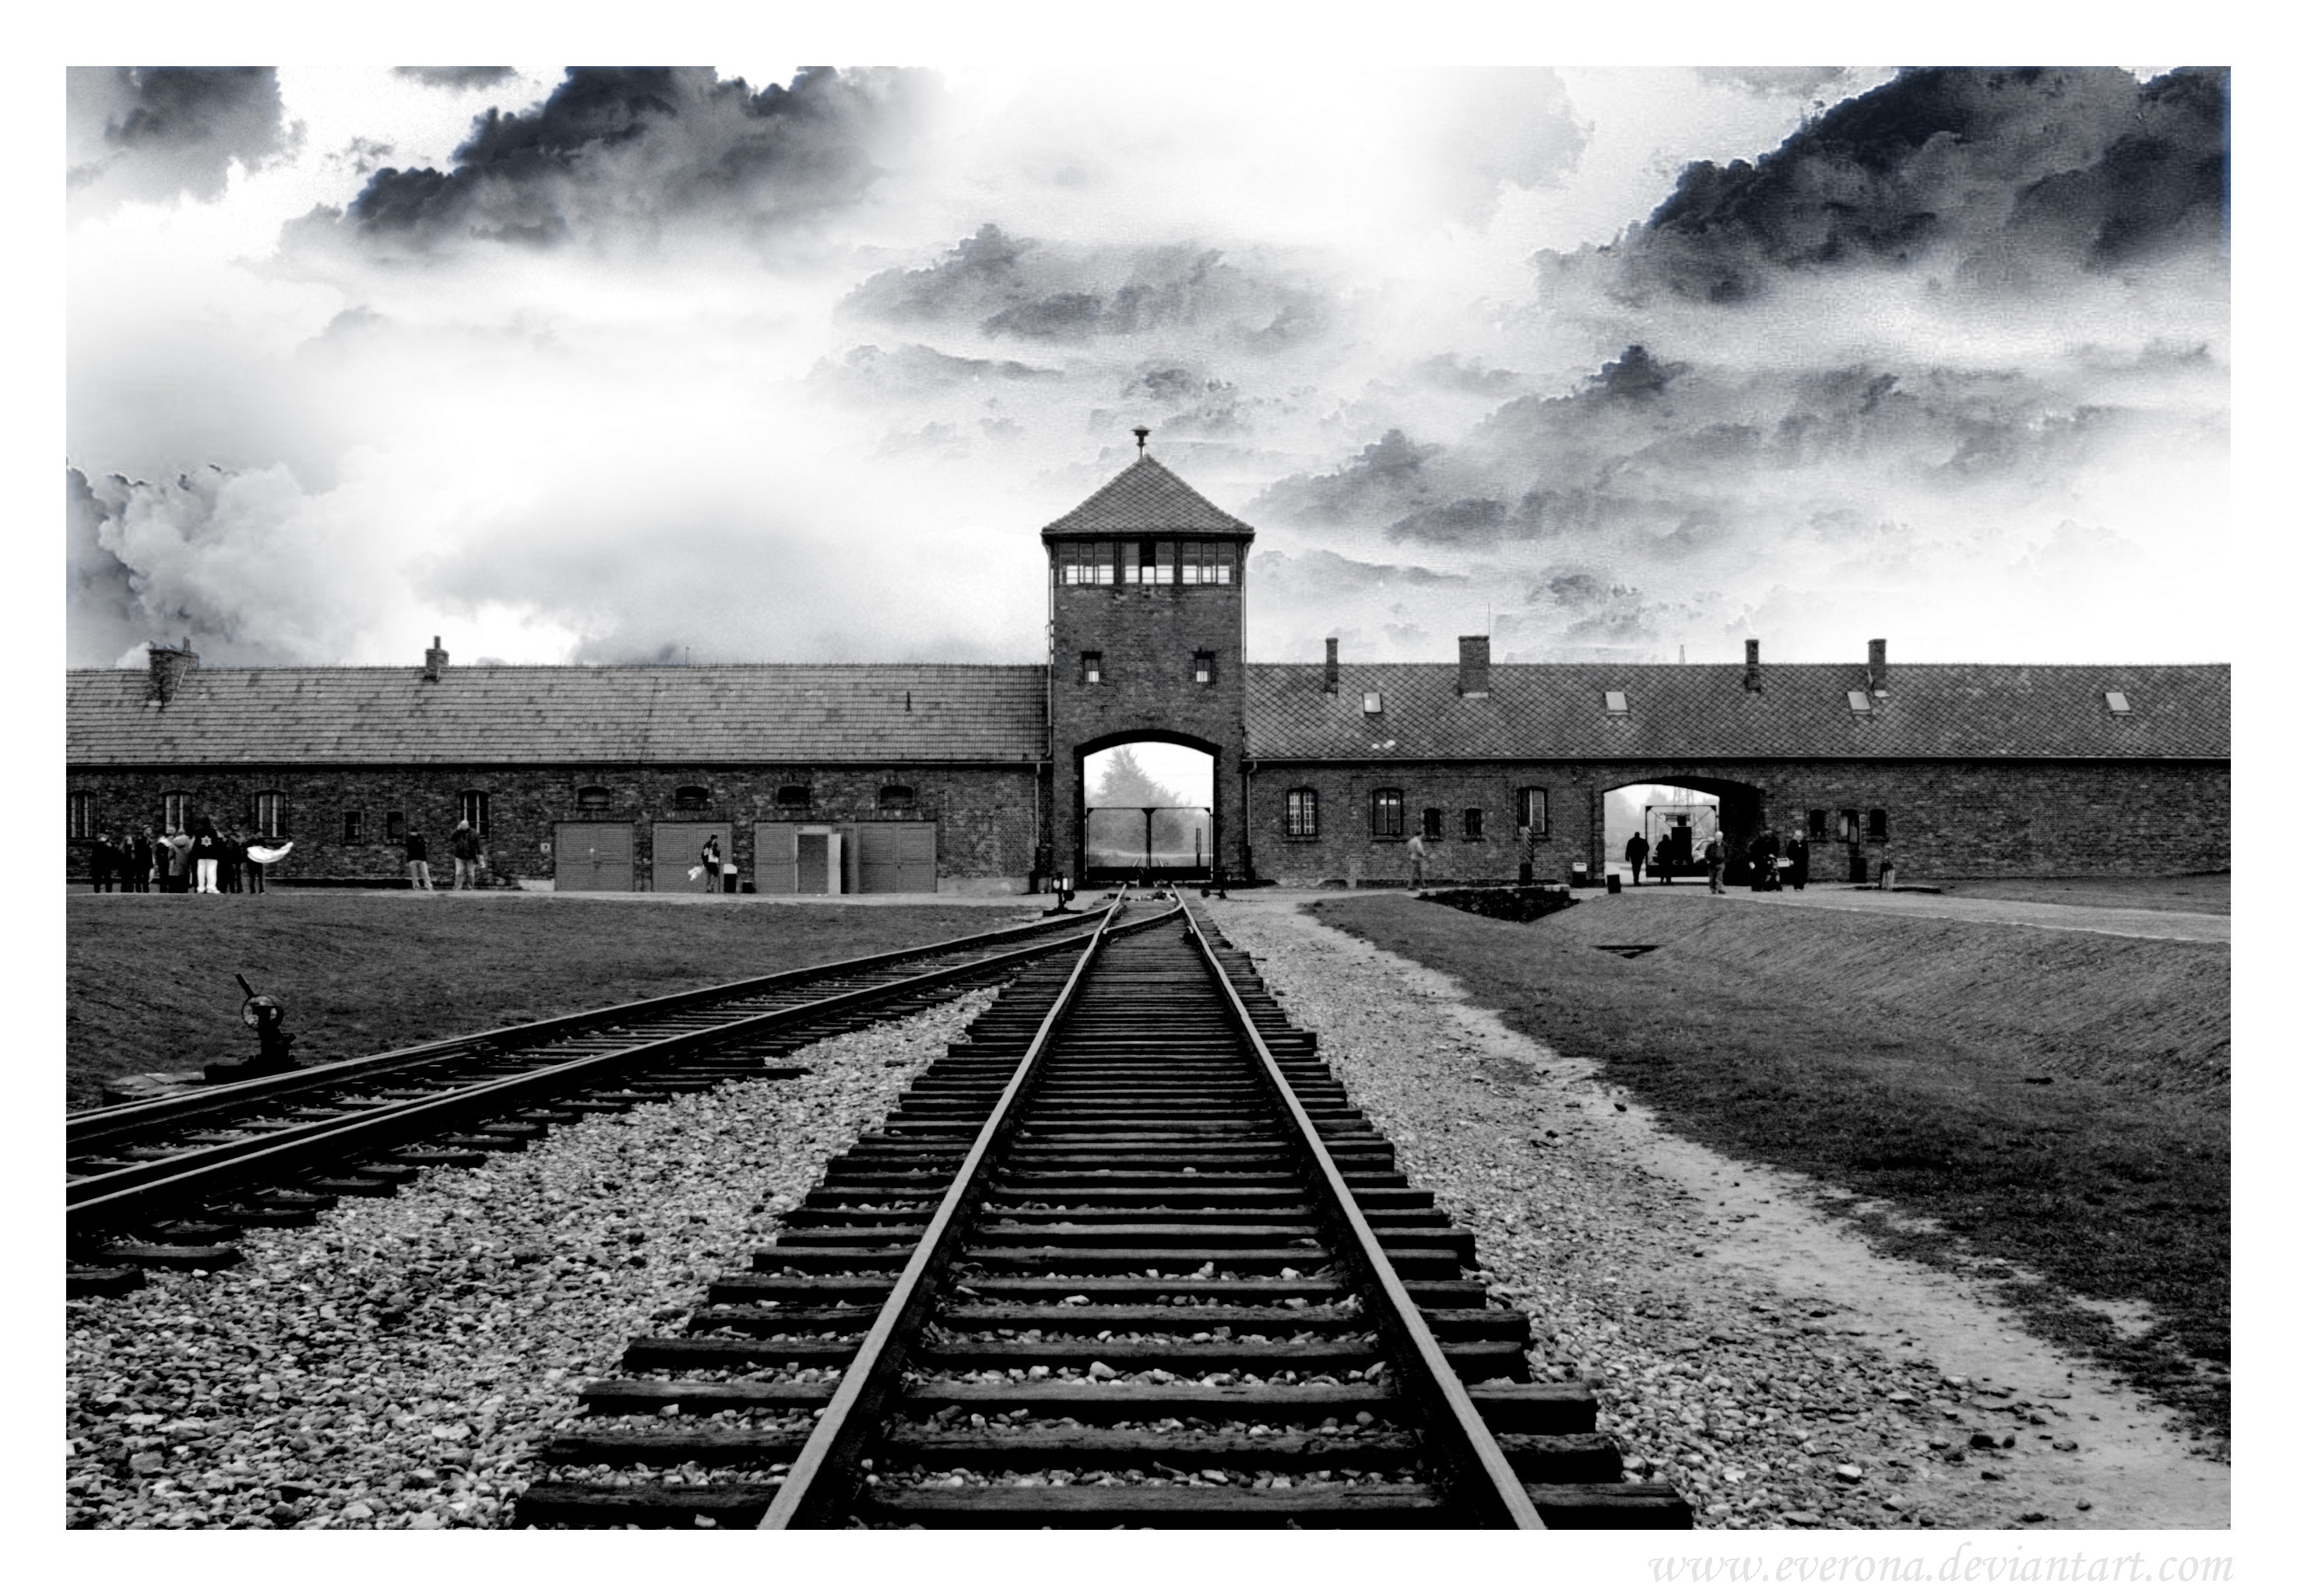 What Is Birkenau?The Image Is Of The Entrance... - Flashcard